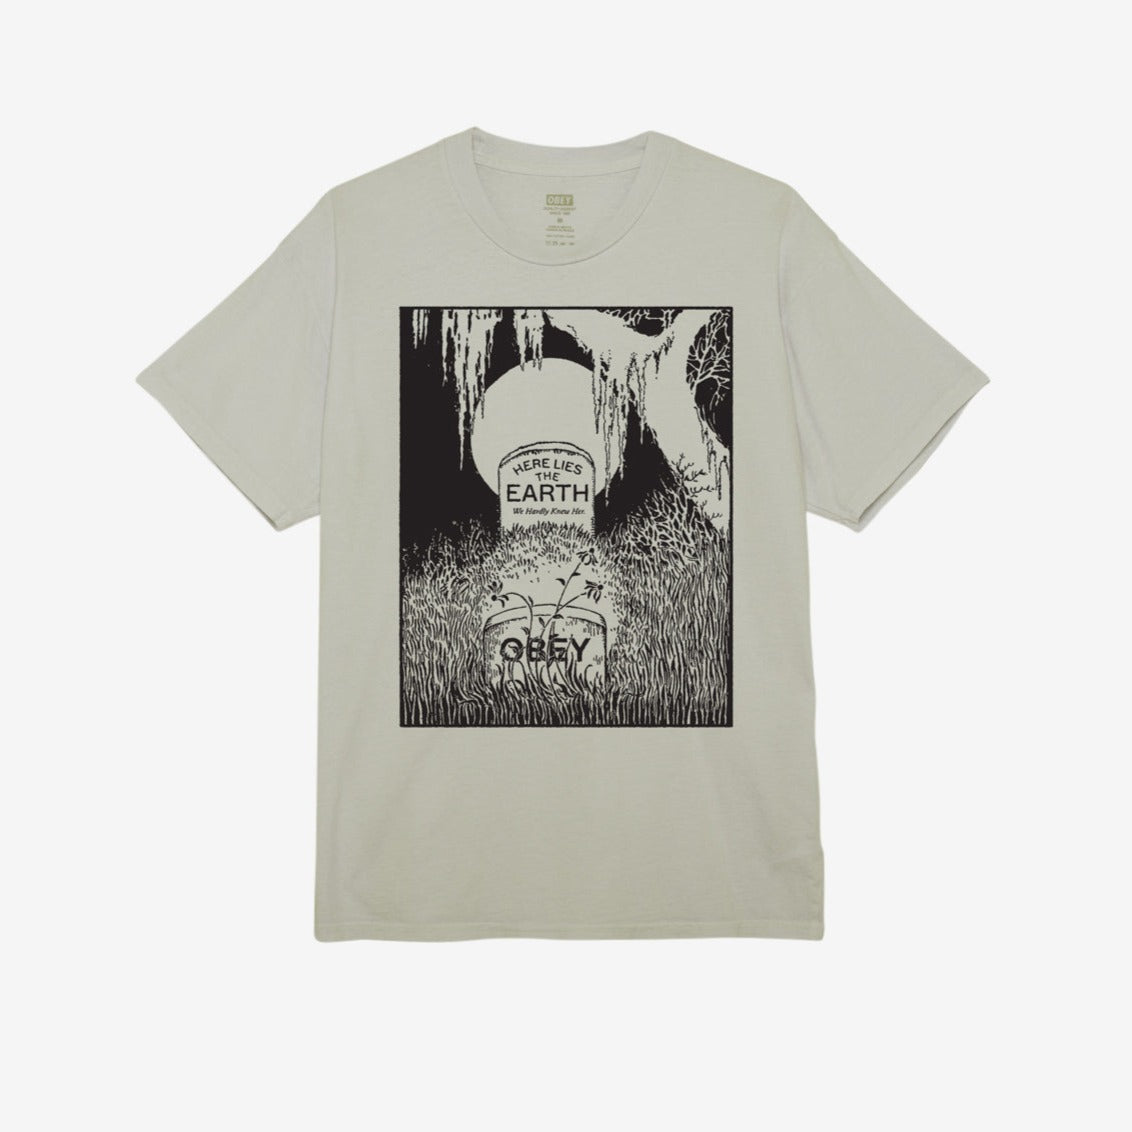 Obey Here Lies the Earth T-Shirt - Pigment Silver